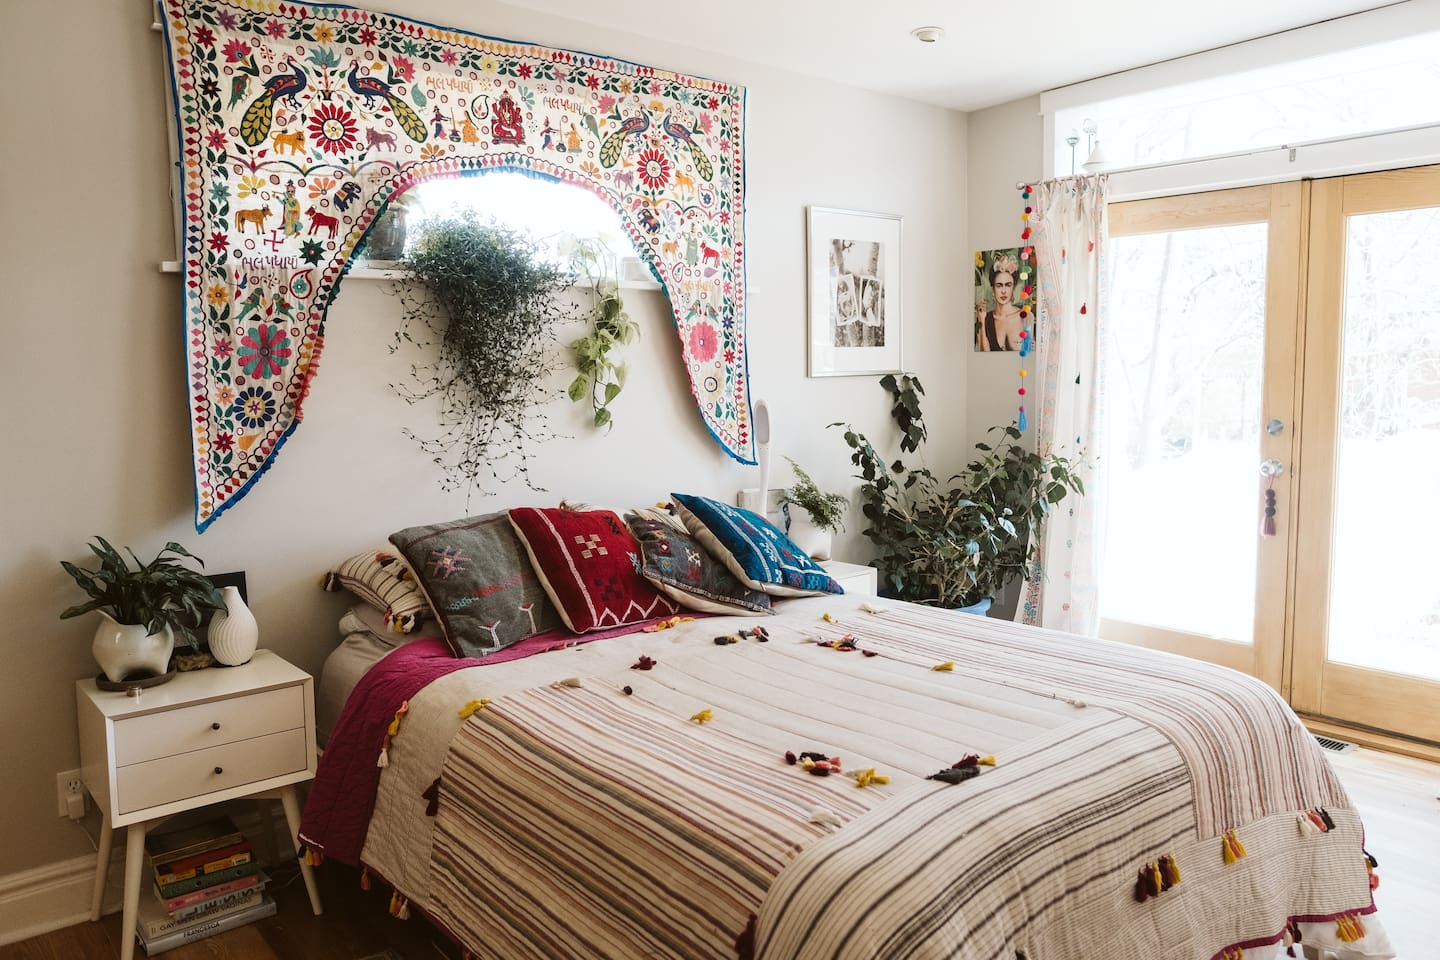 The Dreamy Bohemian Bungalow is one of the best Airbnbs in Boulder